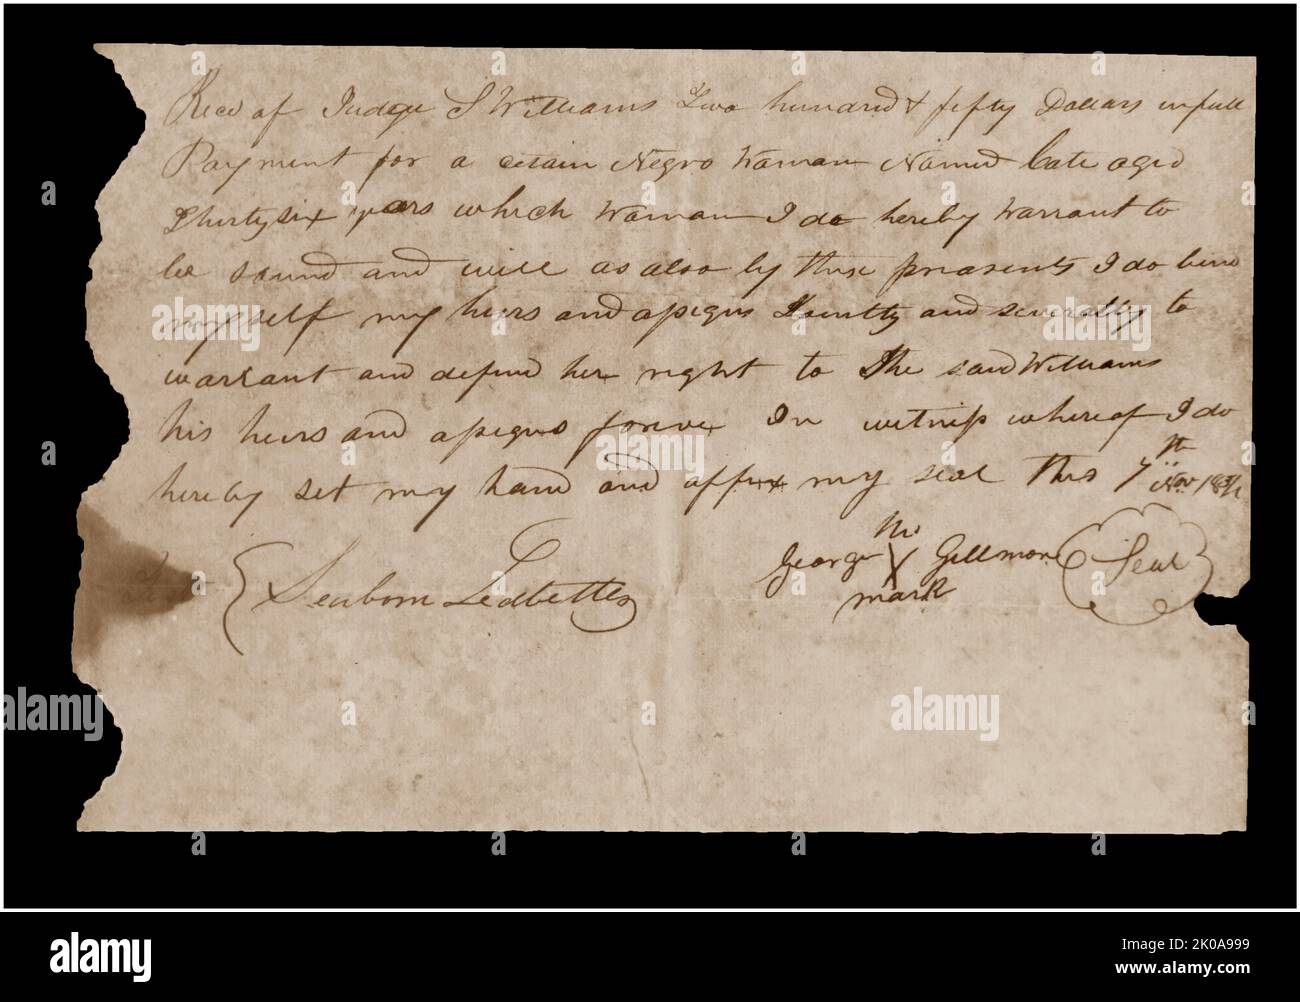 Receipt for $250.00 as payment for Negro man, January 20, 1840. Library of Congress Prints and Photographs Division Washington, D.C., USA Stock Photo